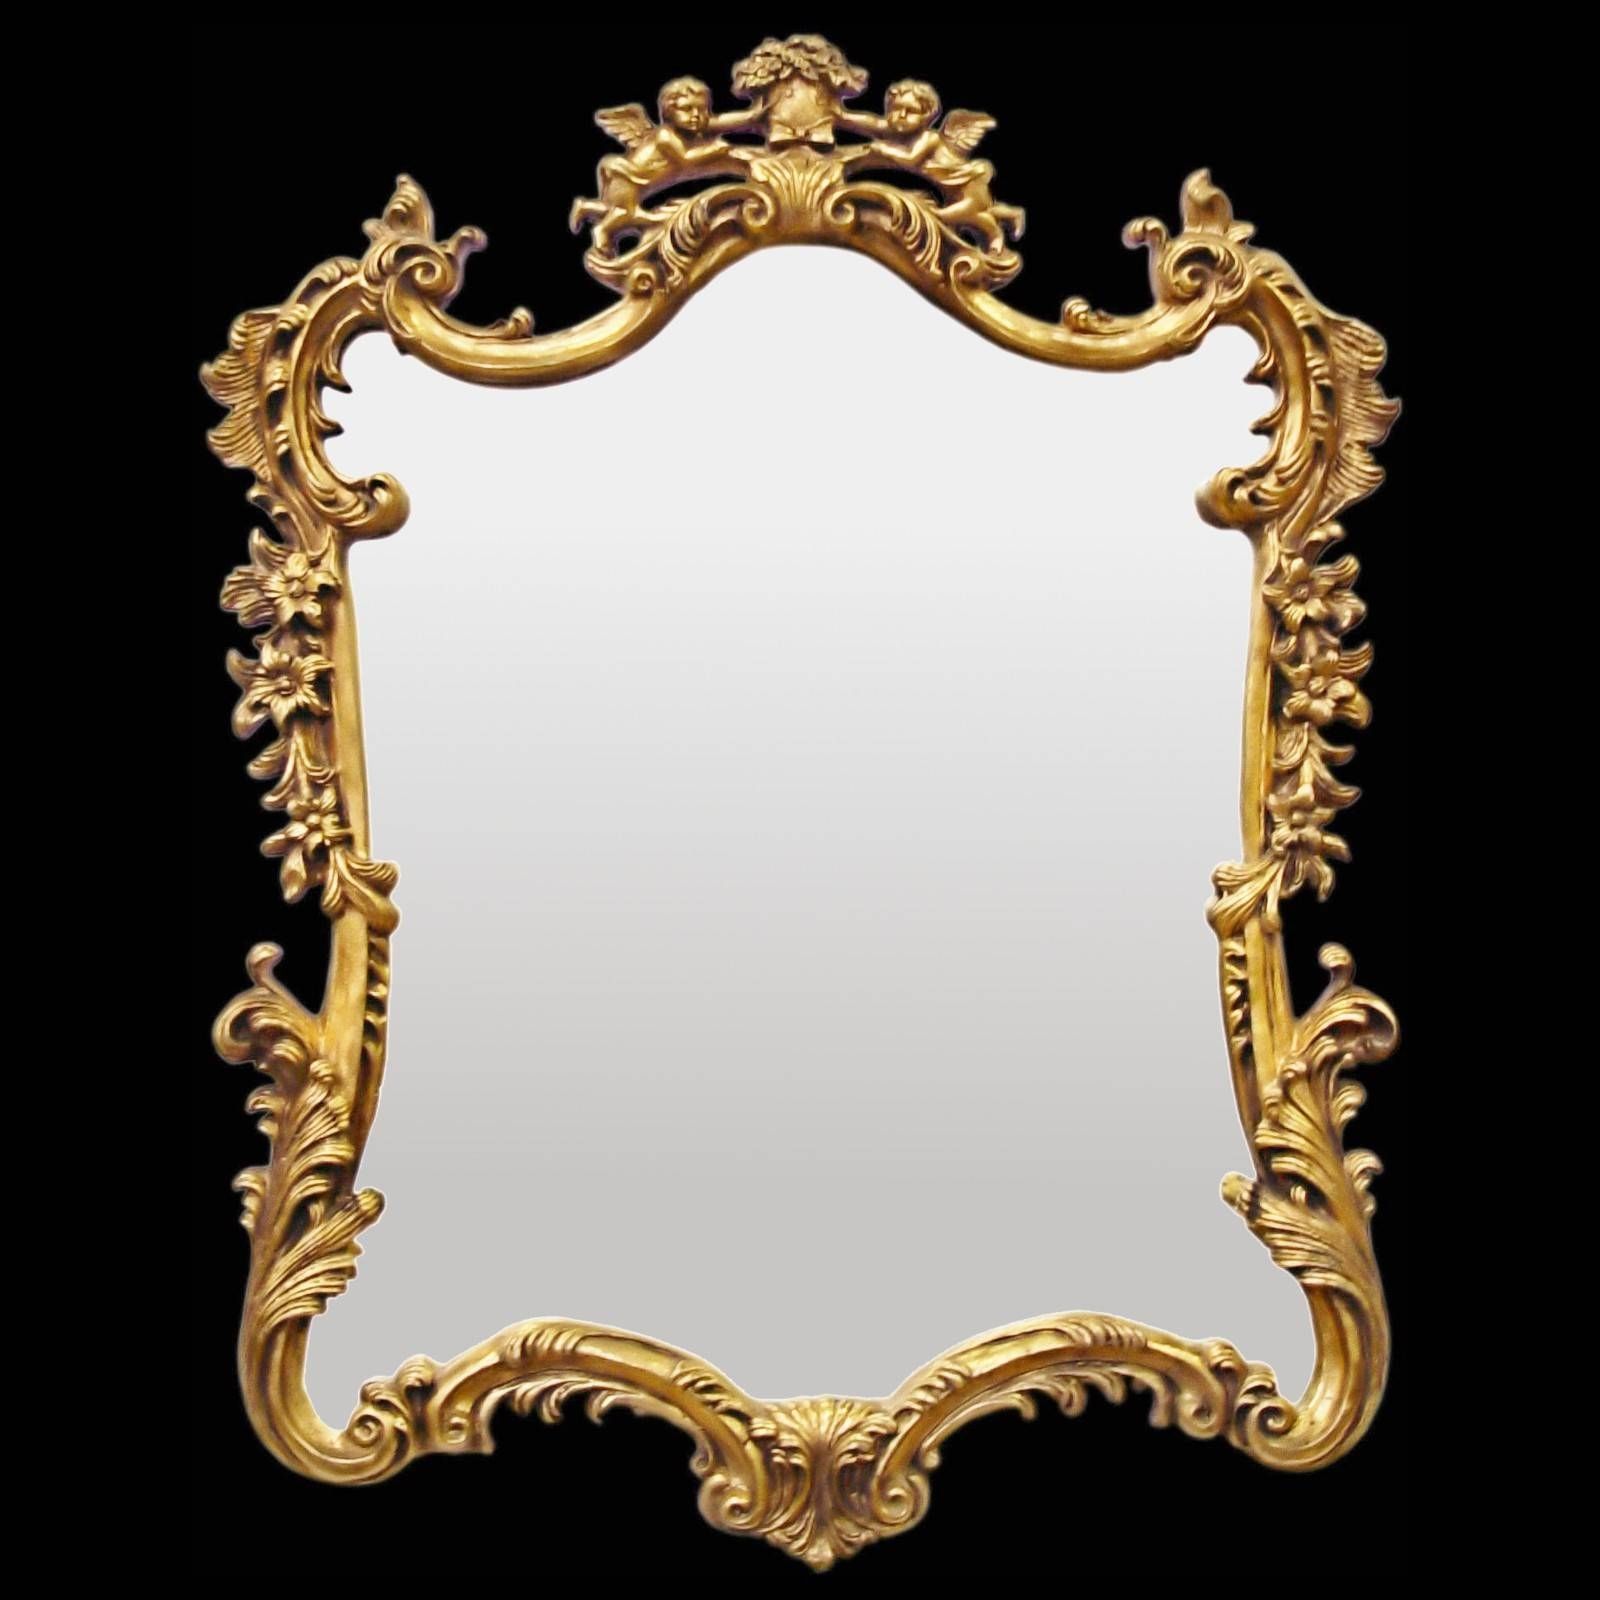 Retro Mirror Decorated Baroque Wall Mirror Gold Angel Petals Inside Gold Baroque Mirrors (View 9 of 15)